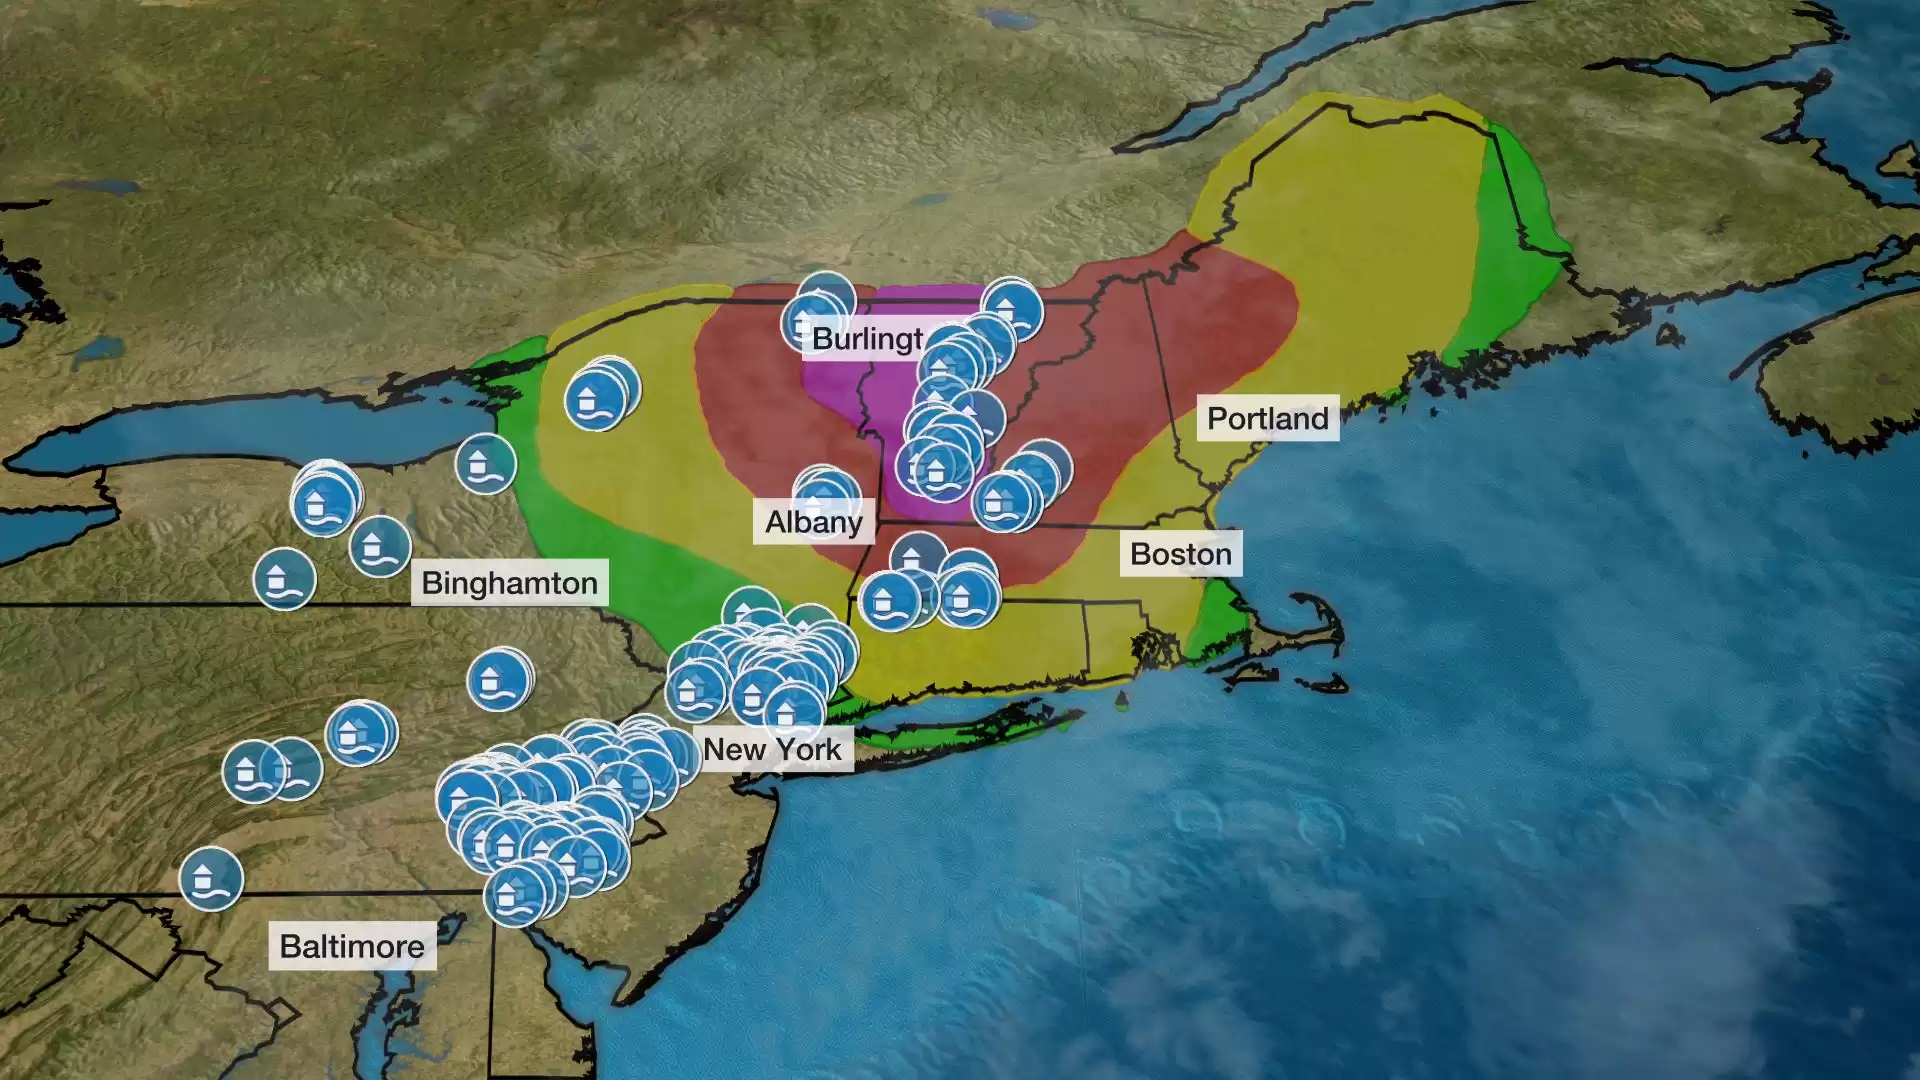 Vermont Bracing for Potential Severe Flooding Similar to Irene